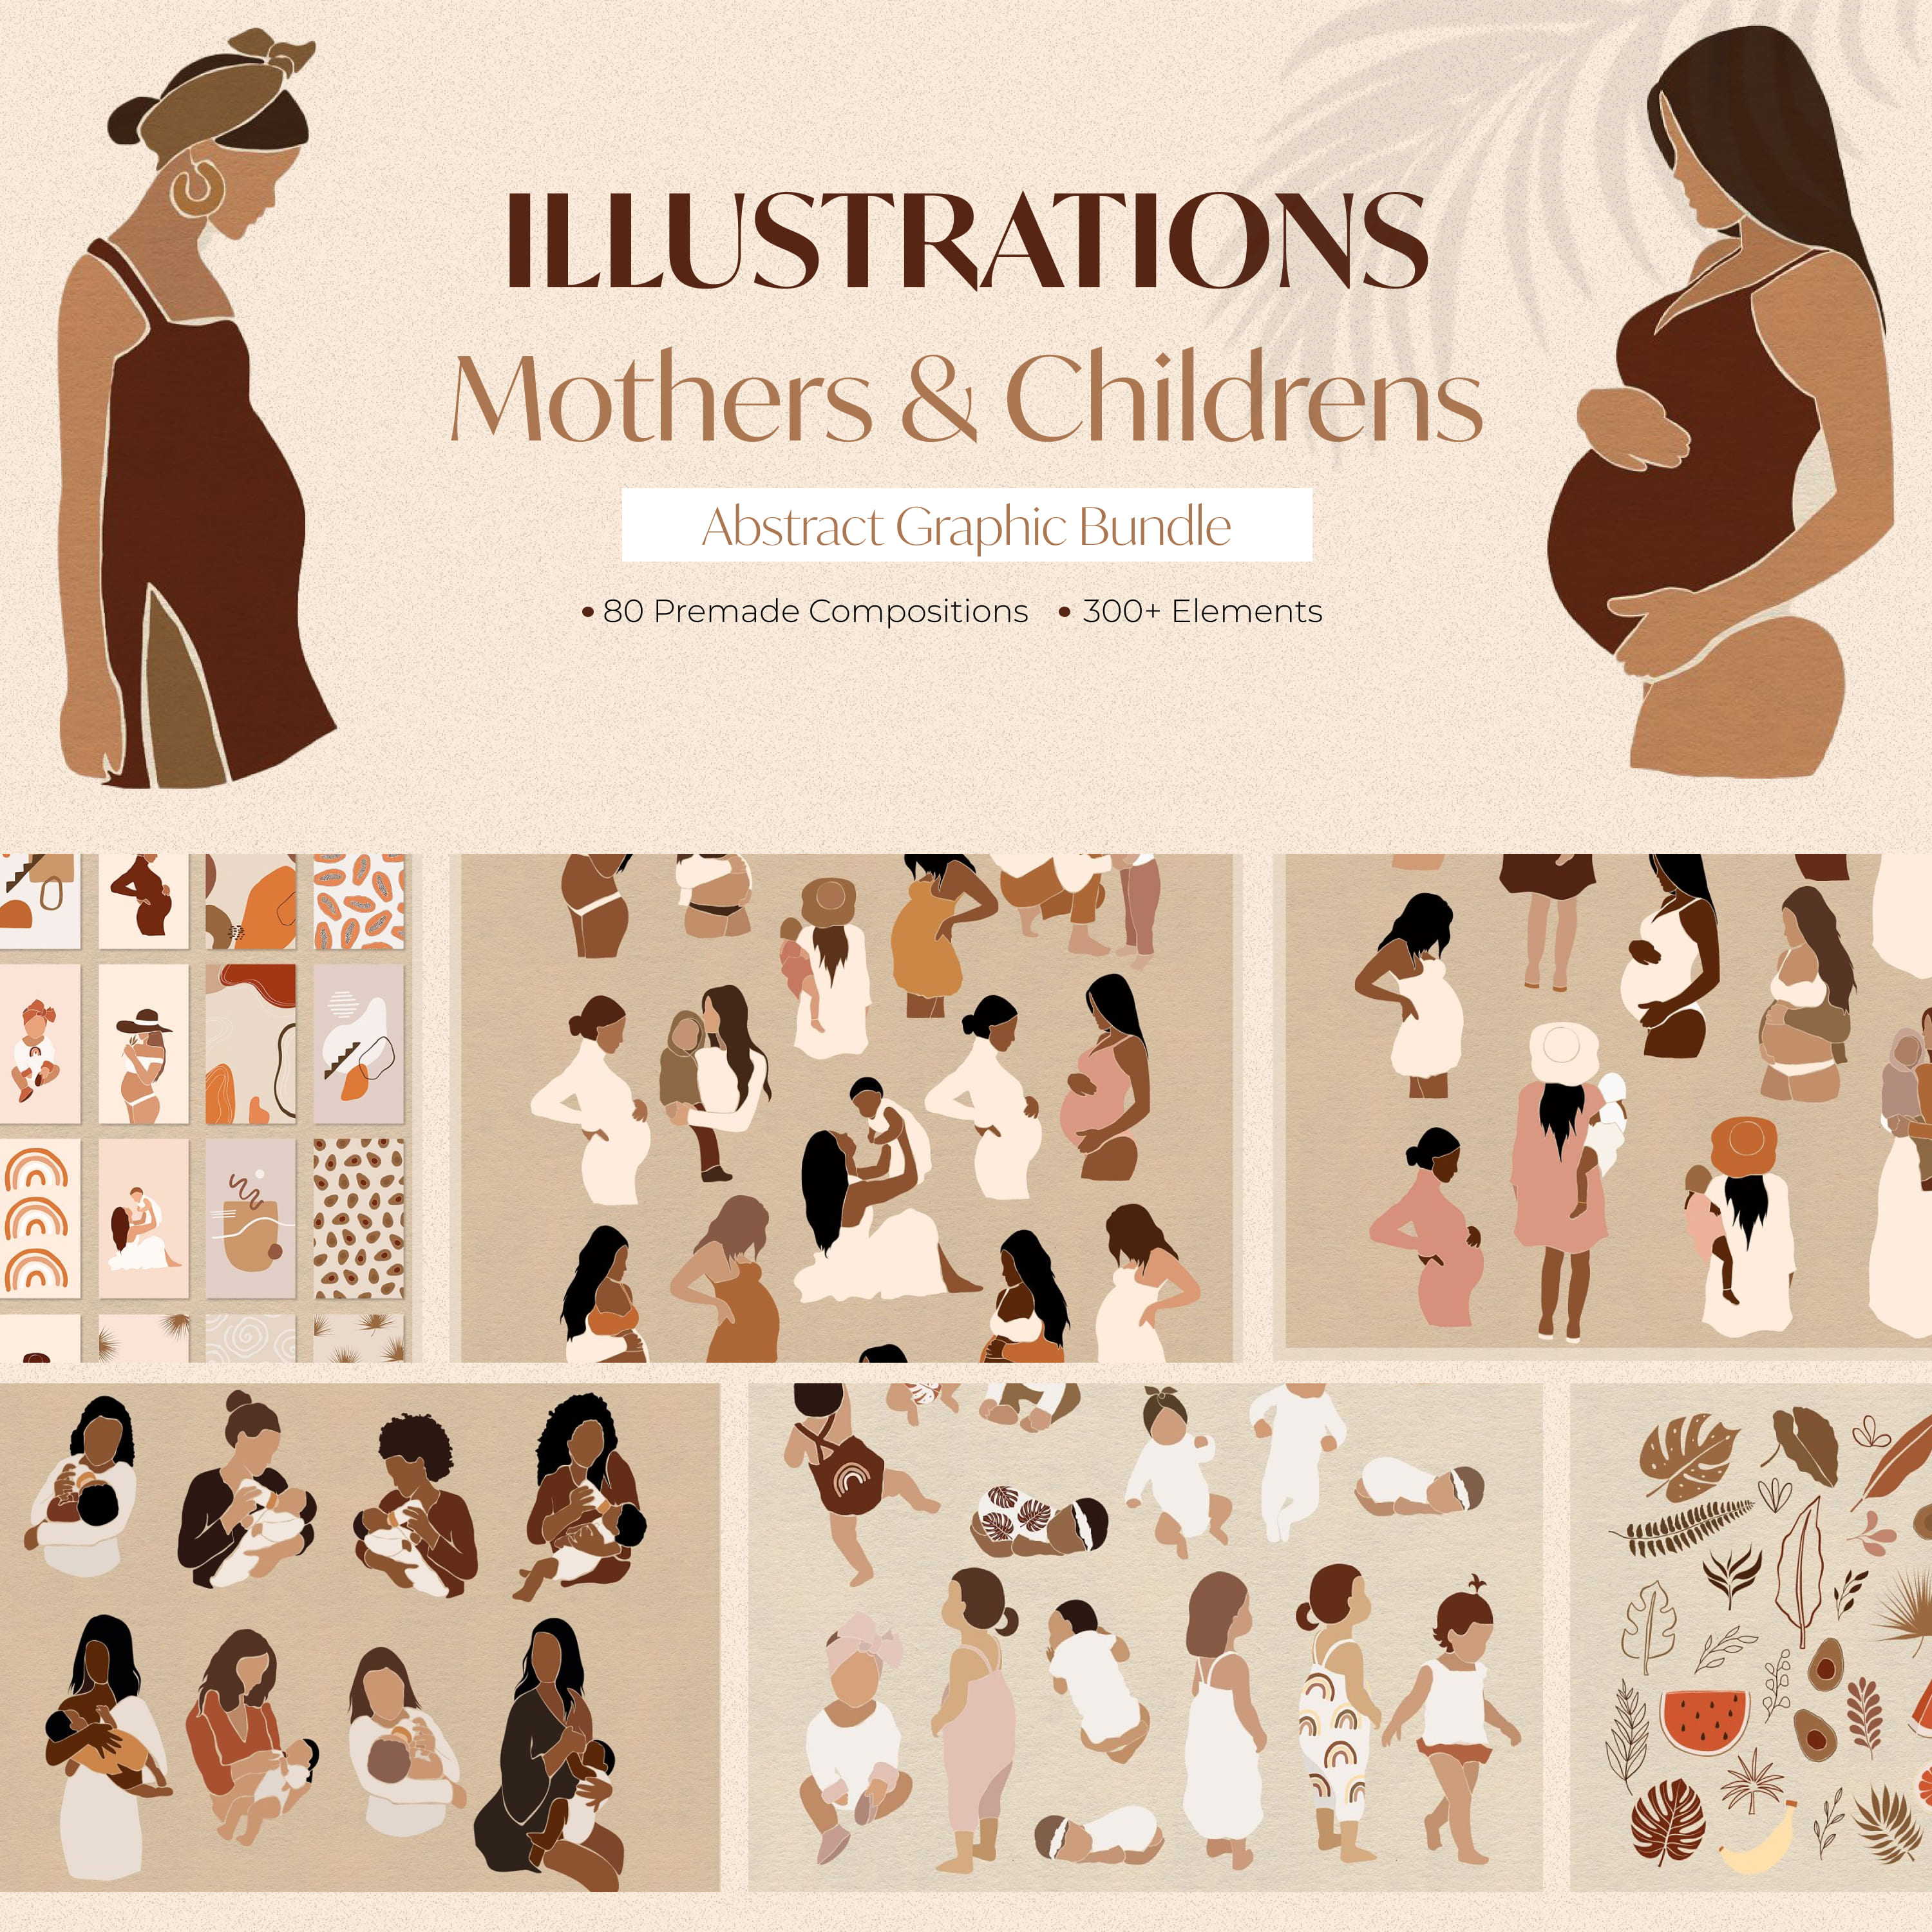 Abstract Graphic Bundle. Mothers cover.